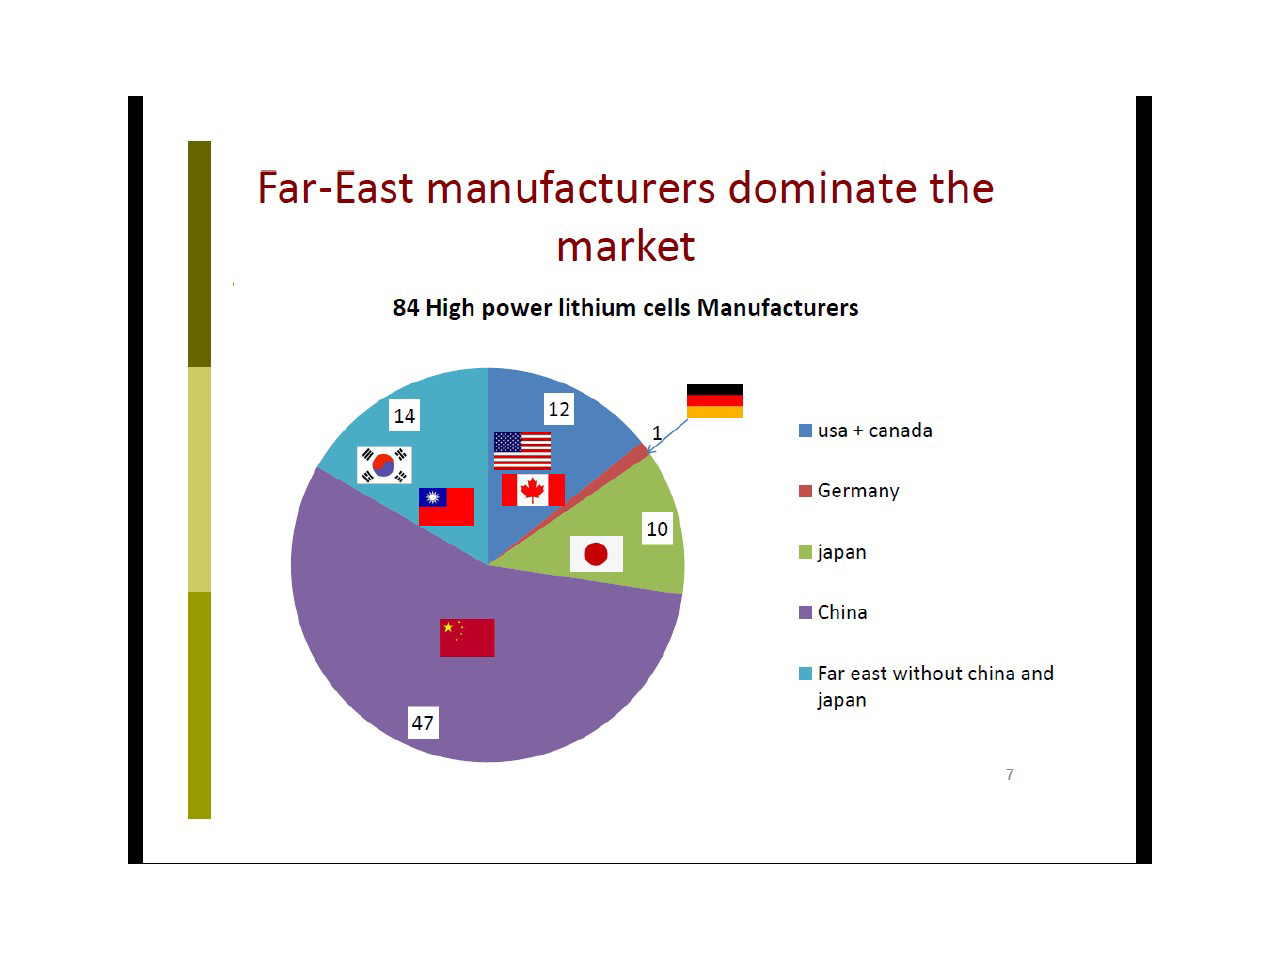 Far-East manufactures dominate the market